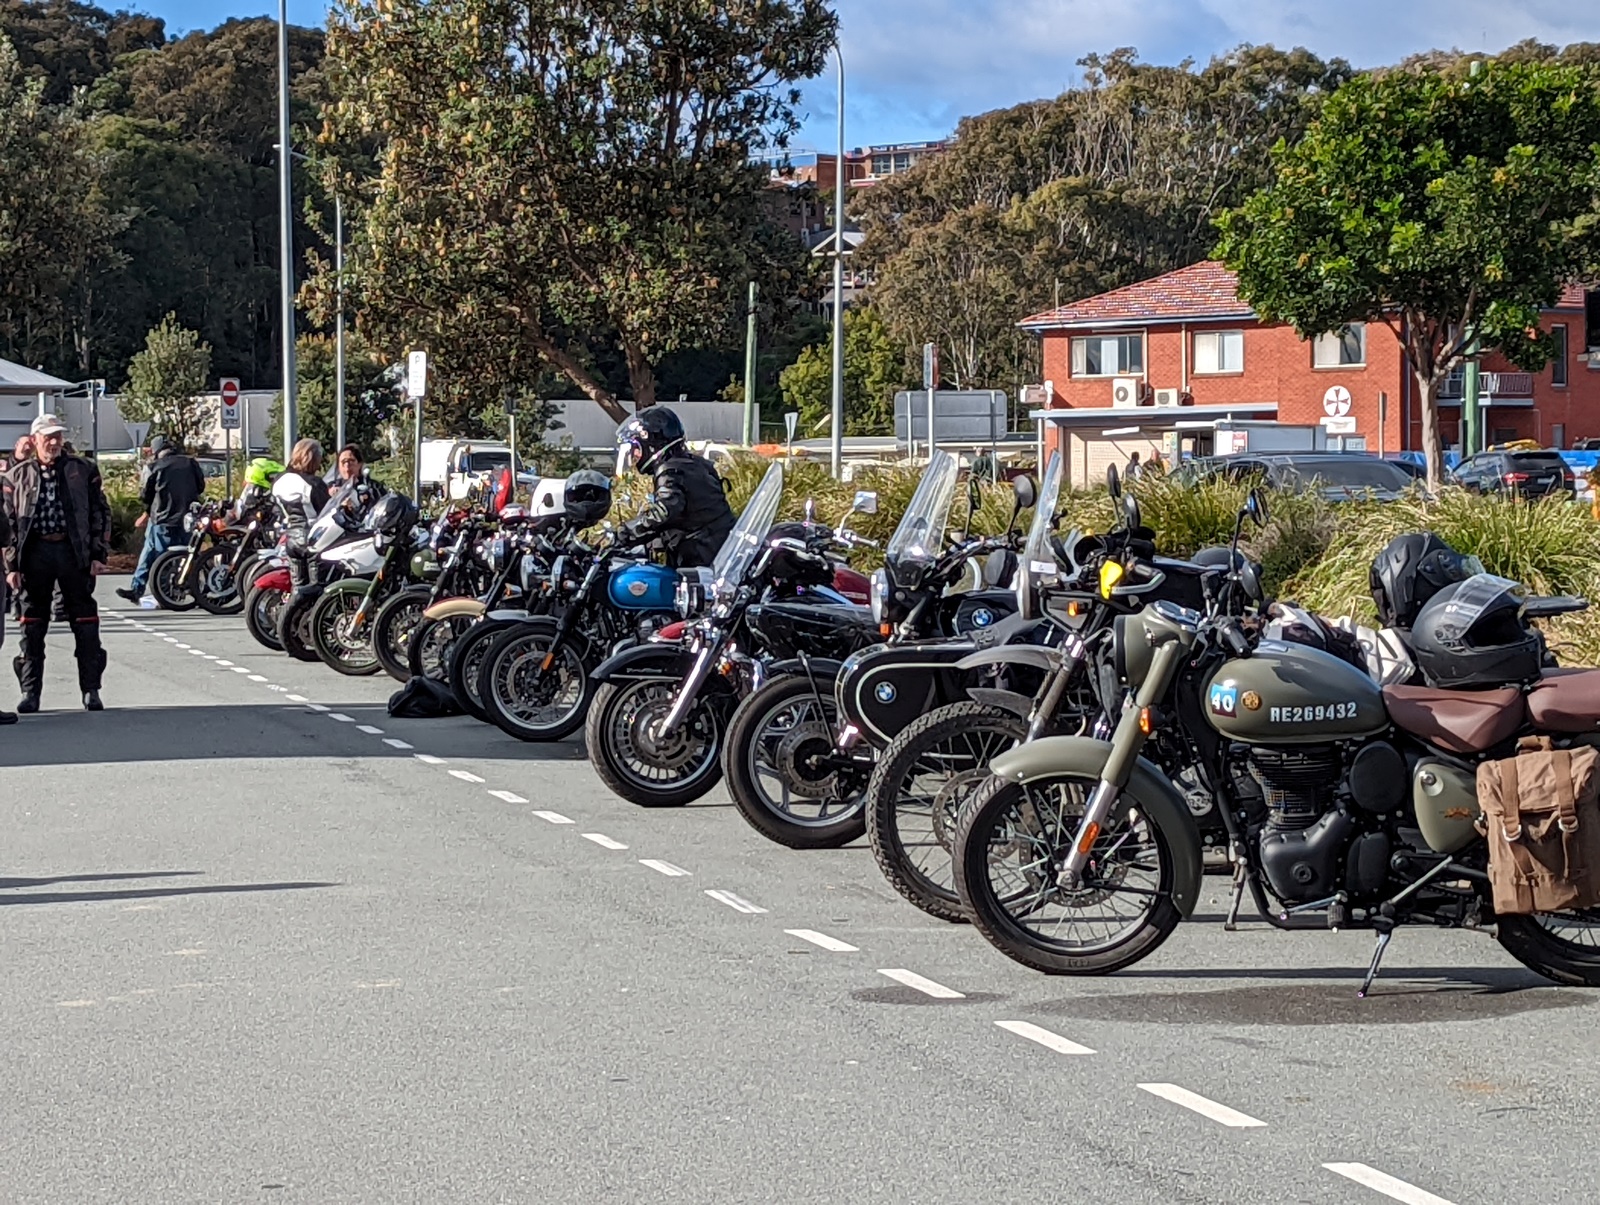 A large group of motorcycles parked on the side of a road Description automatically generated with medium confidence